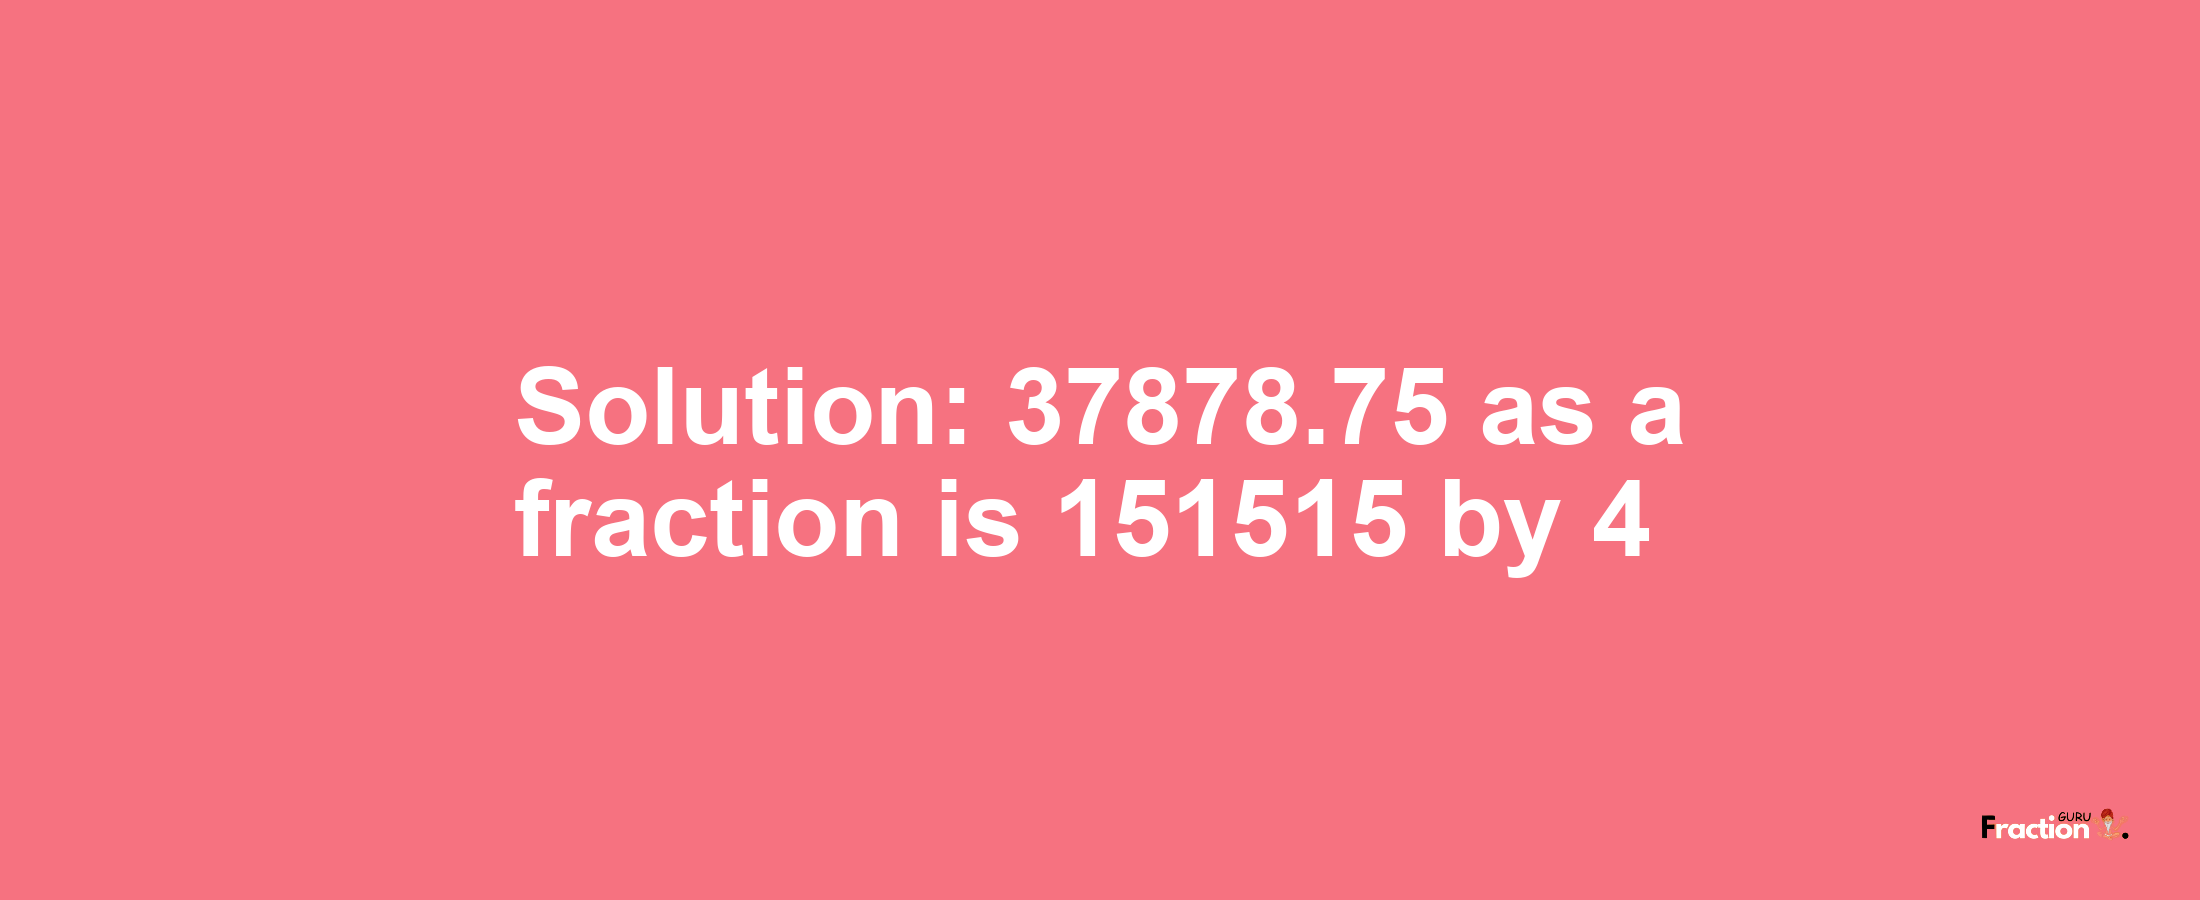 Solution:37878.75 as a fraction is 151515/4